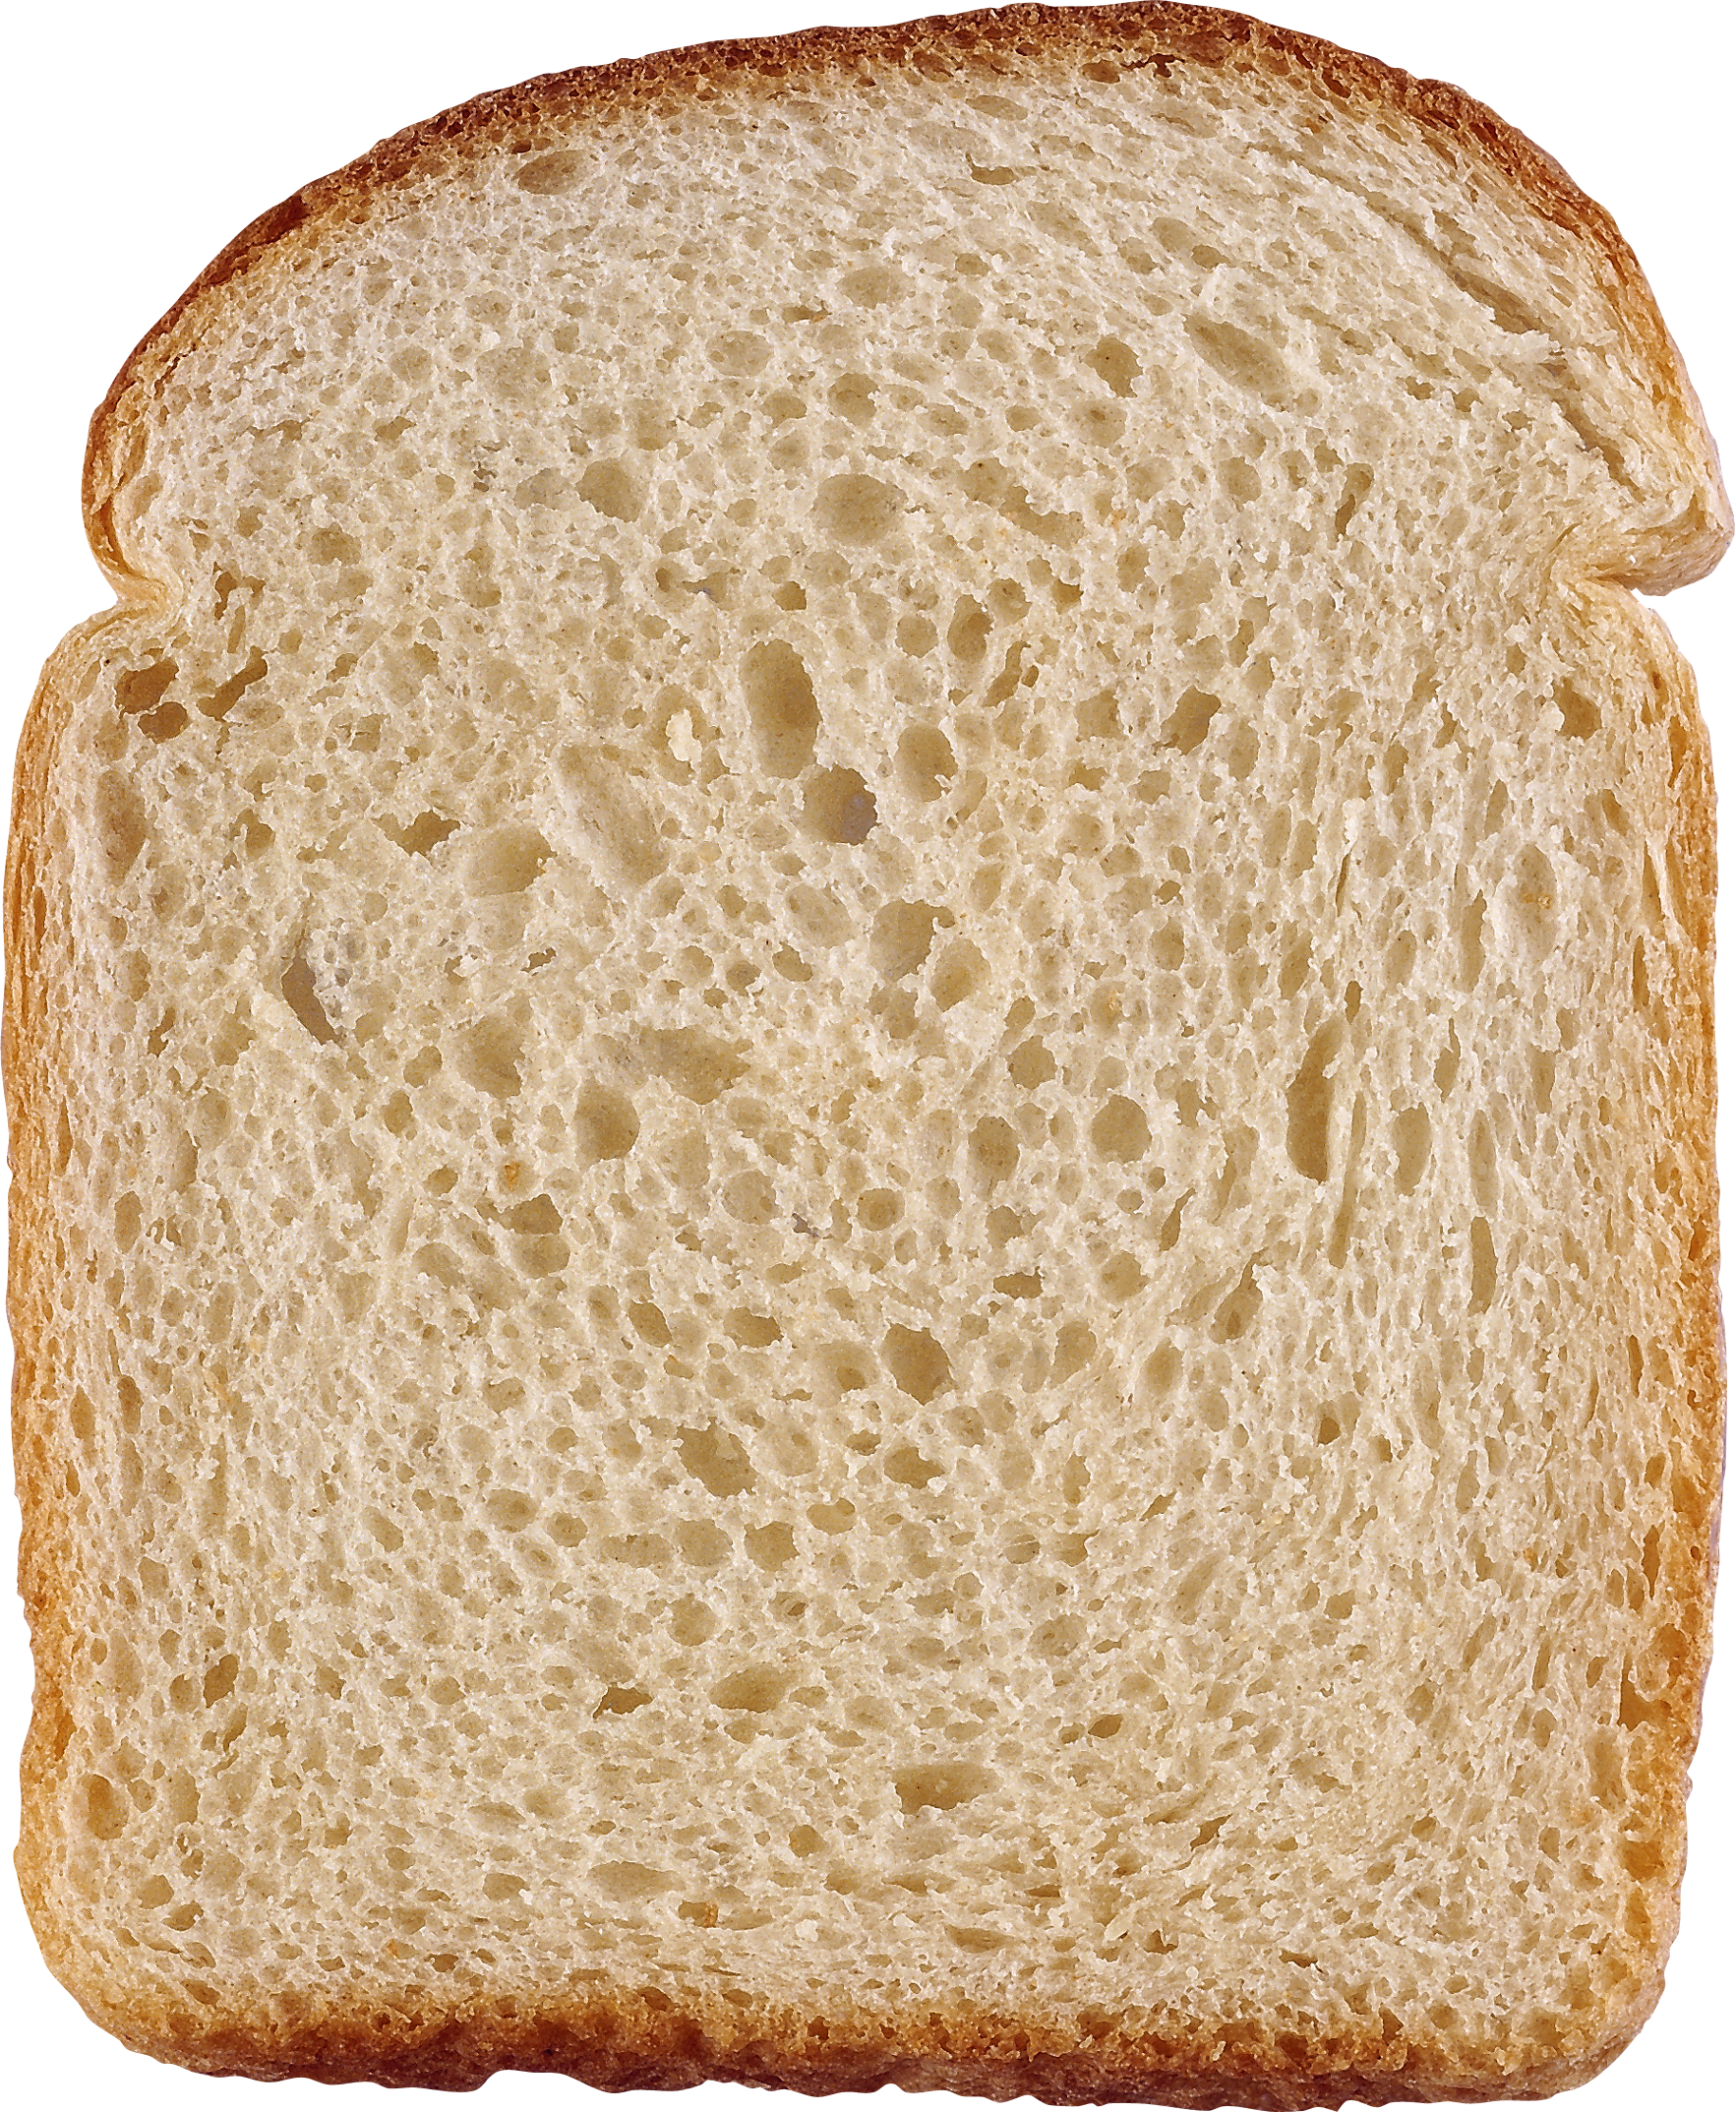 Png image free download. White clipart bread